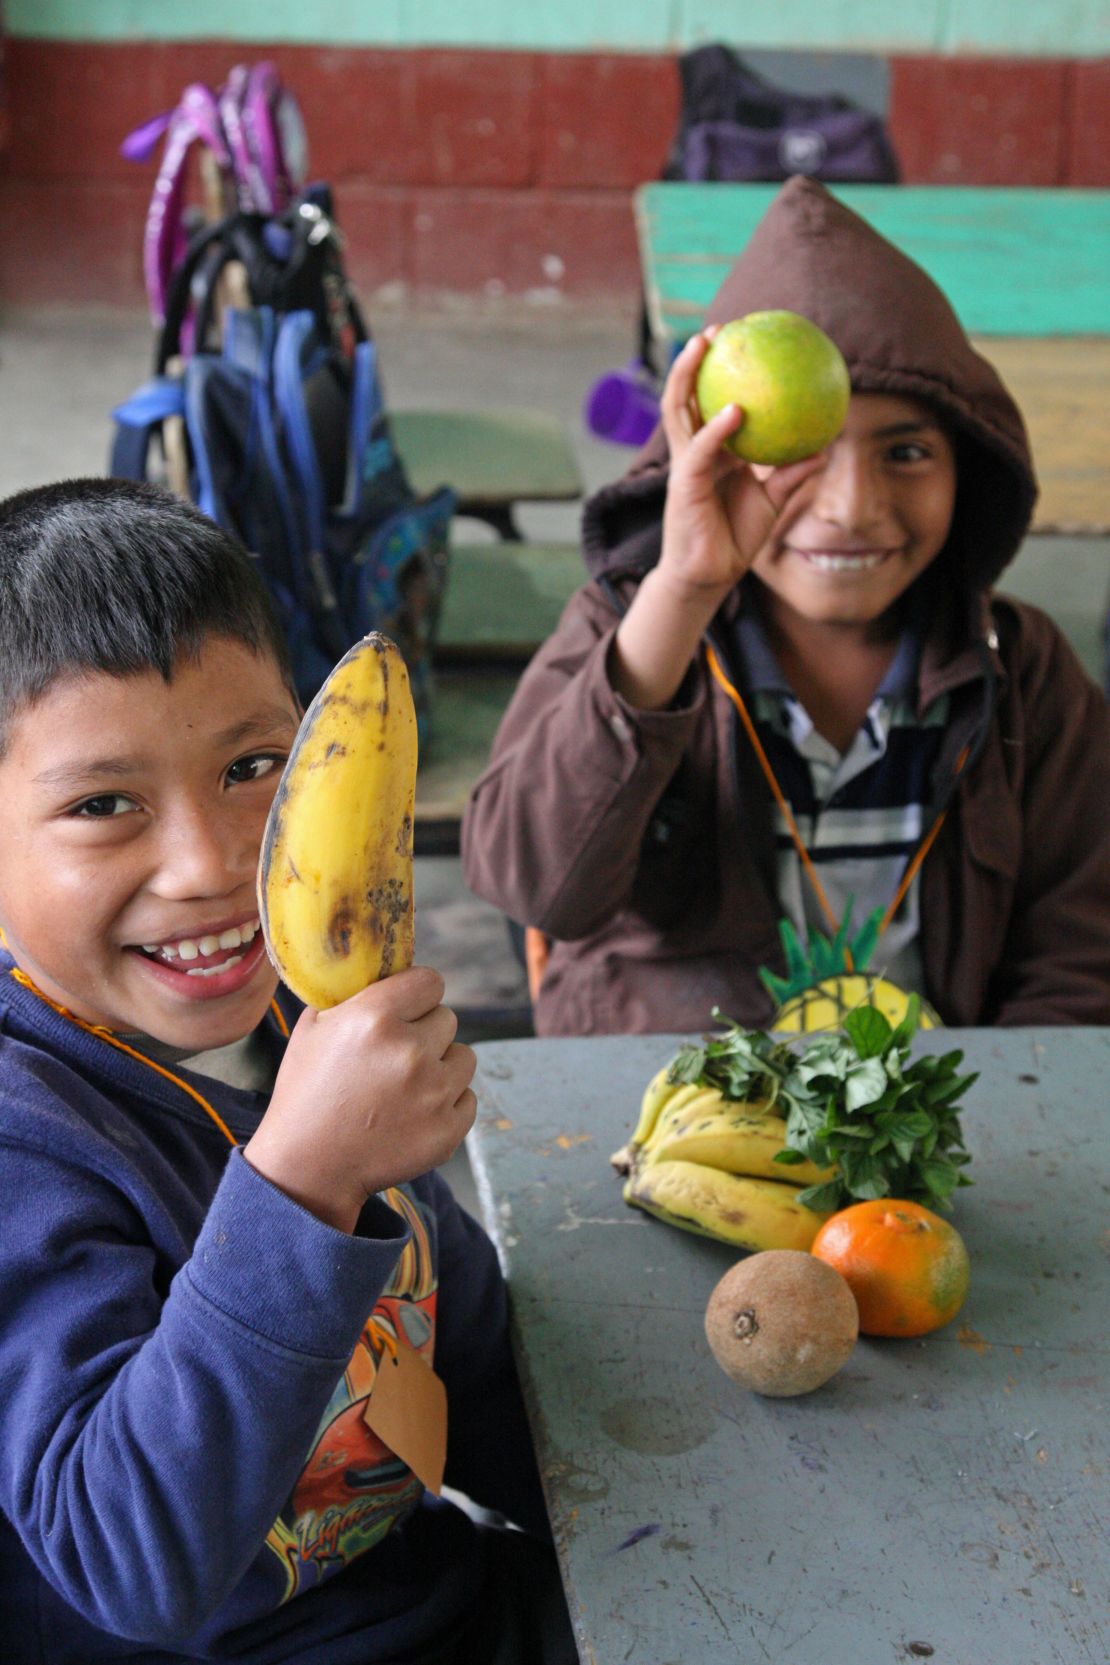 Students show off their "purchases" at a pretend market in school. The exercise encourages them to choose local fruits and vegetables over junk food.  